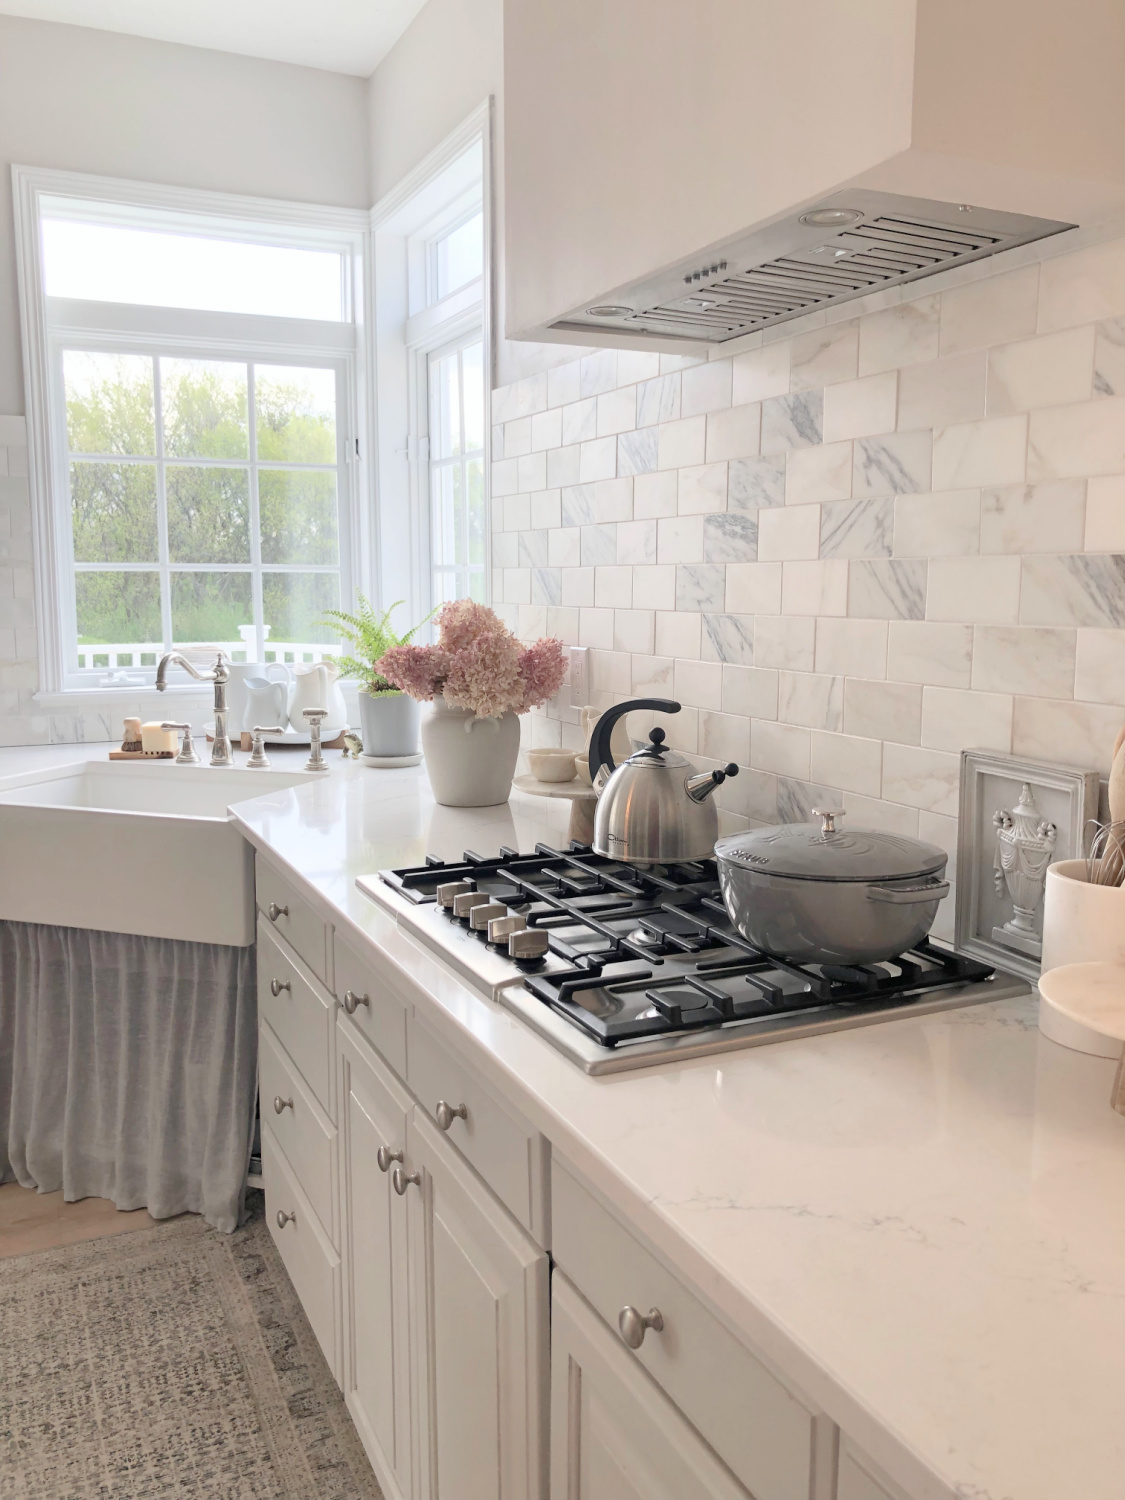 Hello Lovely's light grey and white modern French kitchen with Muse quartz, farm sink, Calacatta marble backsplash and Staub French oven. #staub